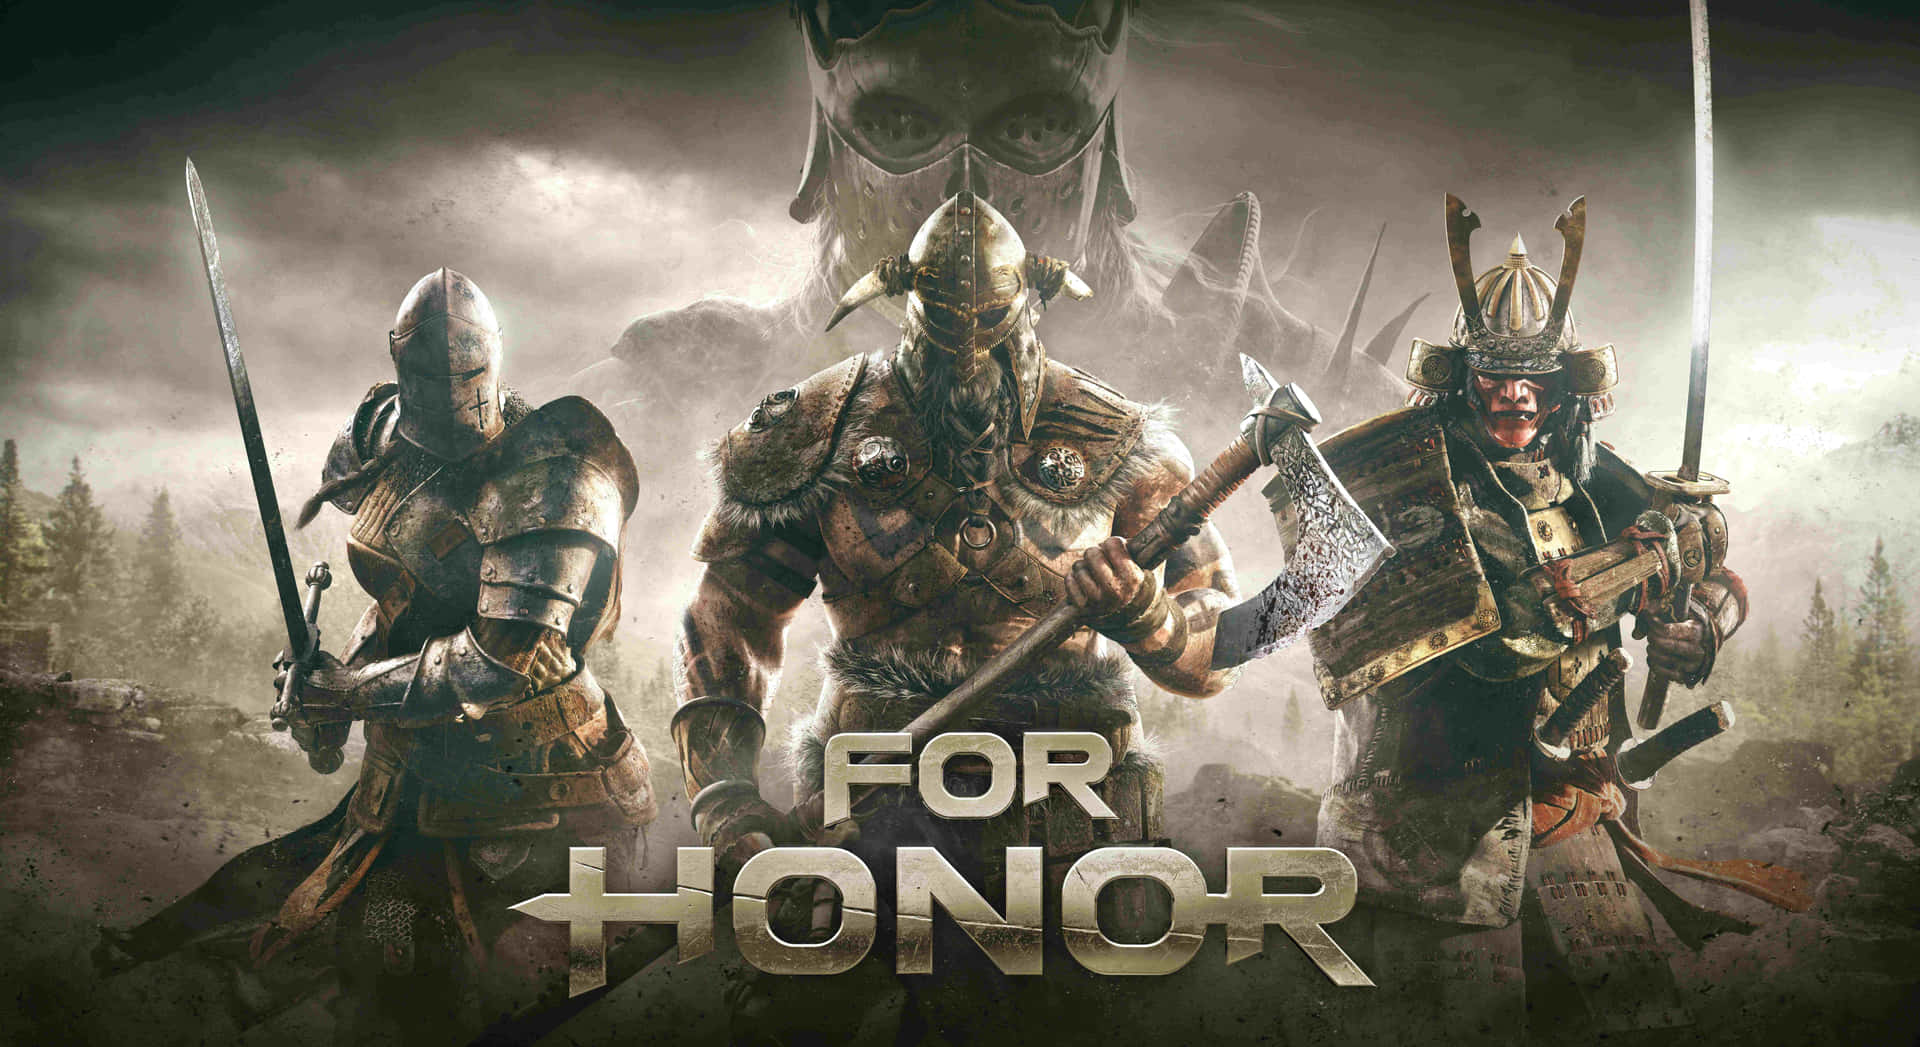 For Honor 11001 X 6000 Background